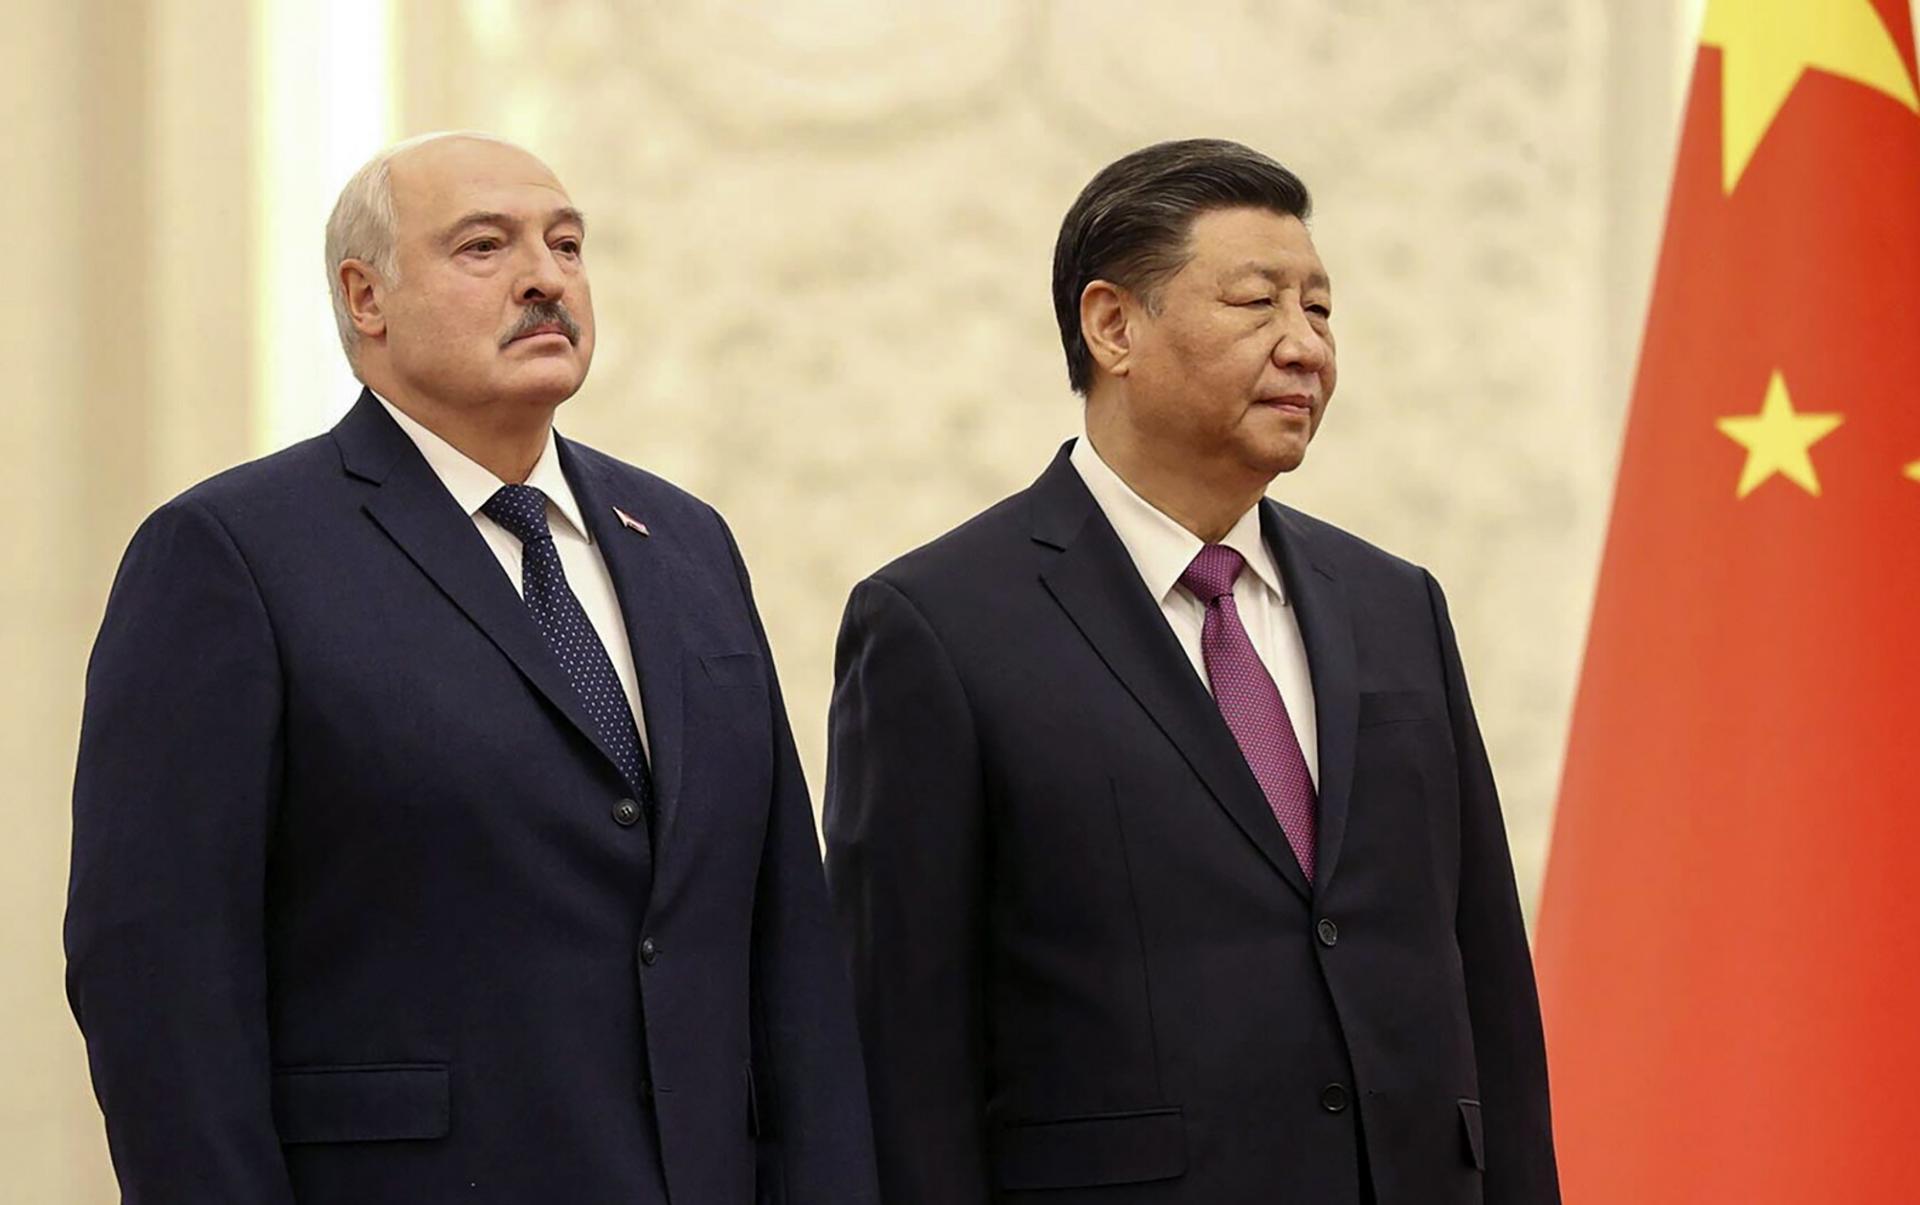 Beijing (China), 01/03/2023.- A handout photo made available by the Belarusian President Press service shows Belarusian President Aleksandr Lukashenko (L) and Chinese President Xi Jinping (R) attend a welcoming ceremony in Beijing, China, 01 March 2023. Lukashenko is on a state visit to China. EFE/EPA/BELARUS PRESIDENT PRESS SERVICE / HANDOUT HANDOUT EDITORIAL USE ONLY/NO SALES